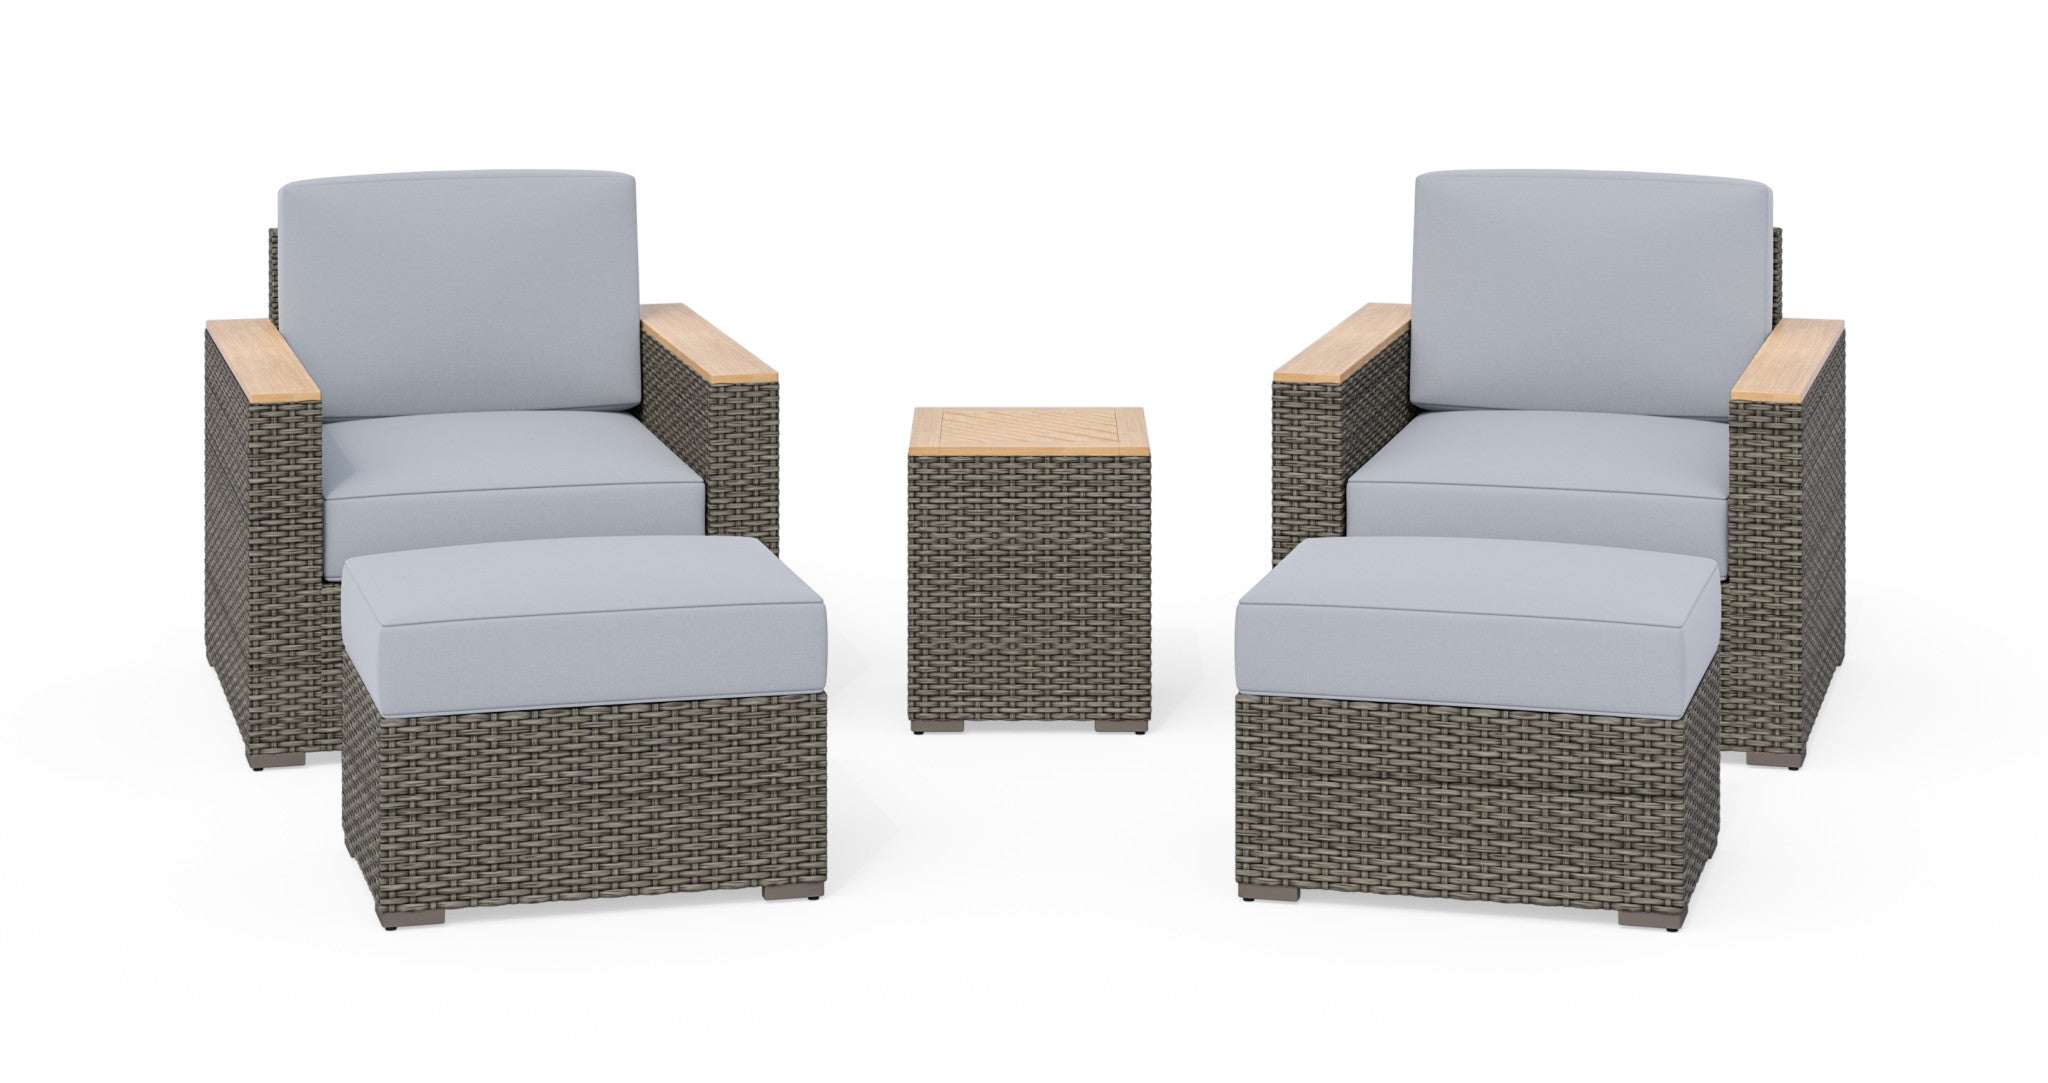 Homestyles Boca Raton Brown Outdoor Side Table Arm Chair Pair and Two Ottomans - image 1 of 5